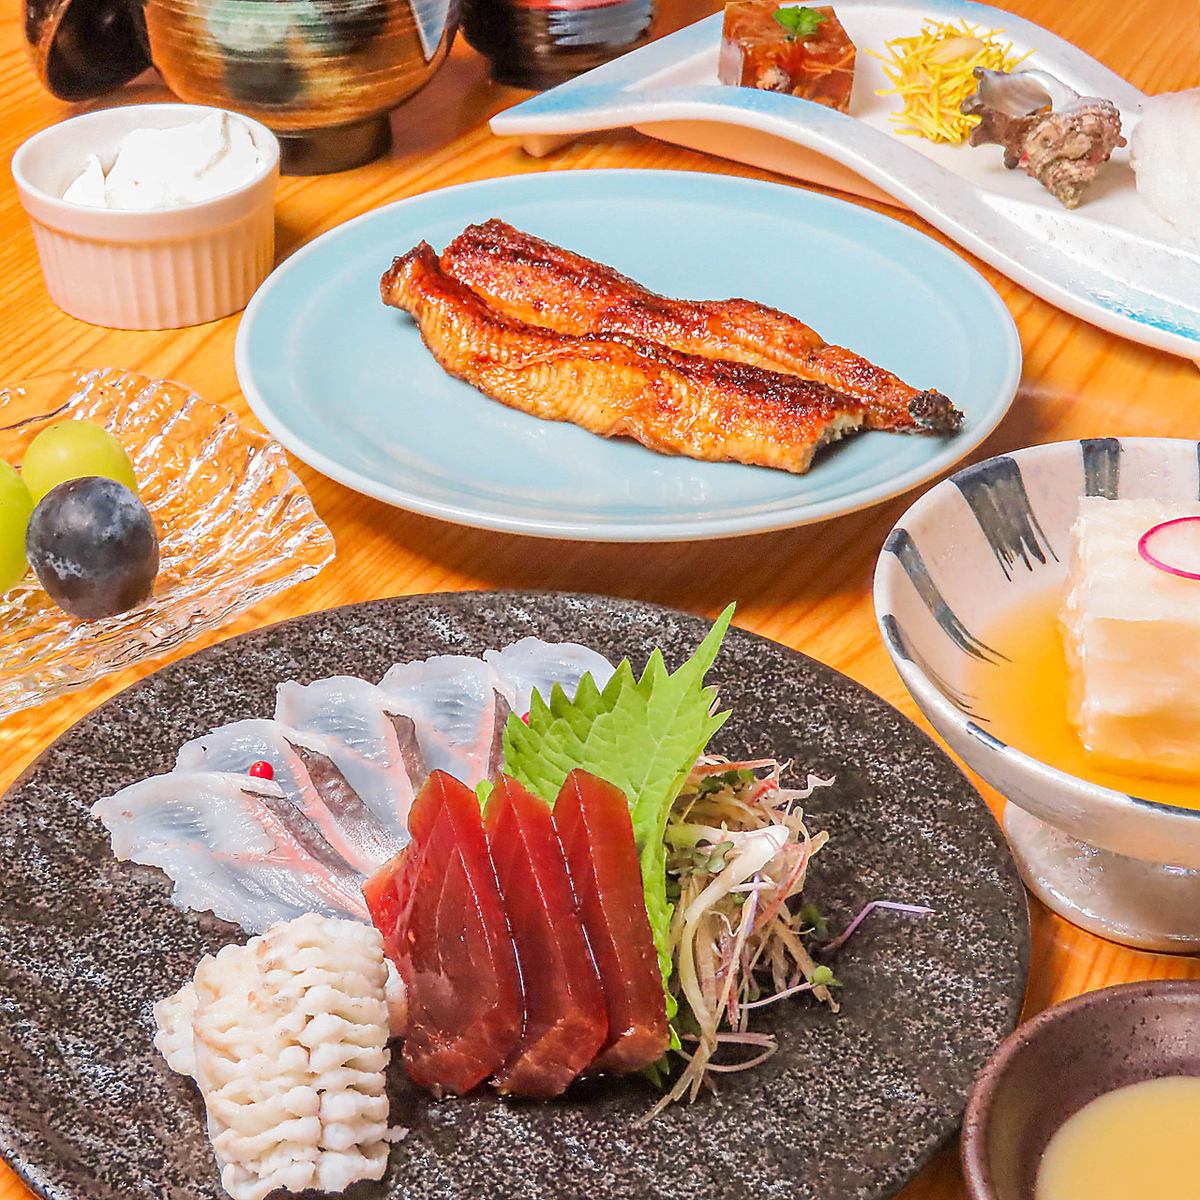 Please enjoy Kansai-style eel jus and rare eel dishes such as sashimi.